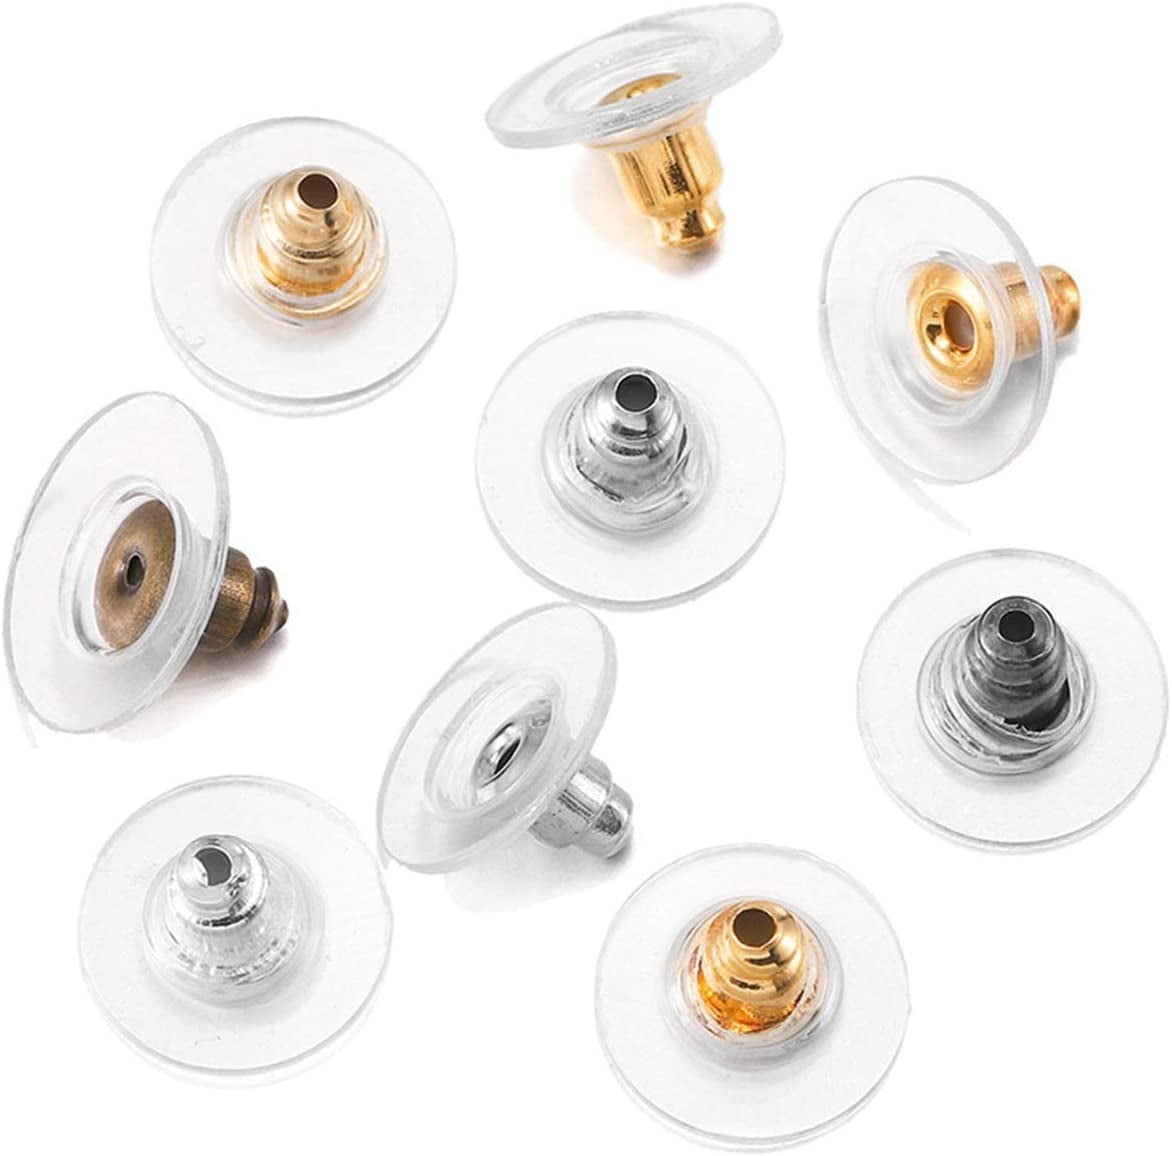 Kinteshun Silicon Rubber Stud Earring Backs,Soft Clear Safety Round Disc  Earnuts Earring Stopper for DIY Jewelry Making Supplies(100pcs）